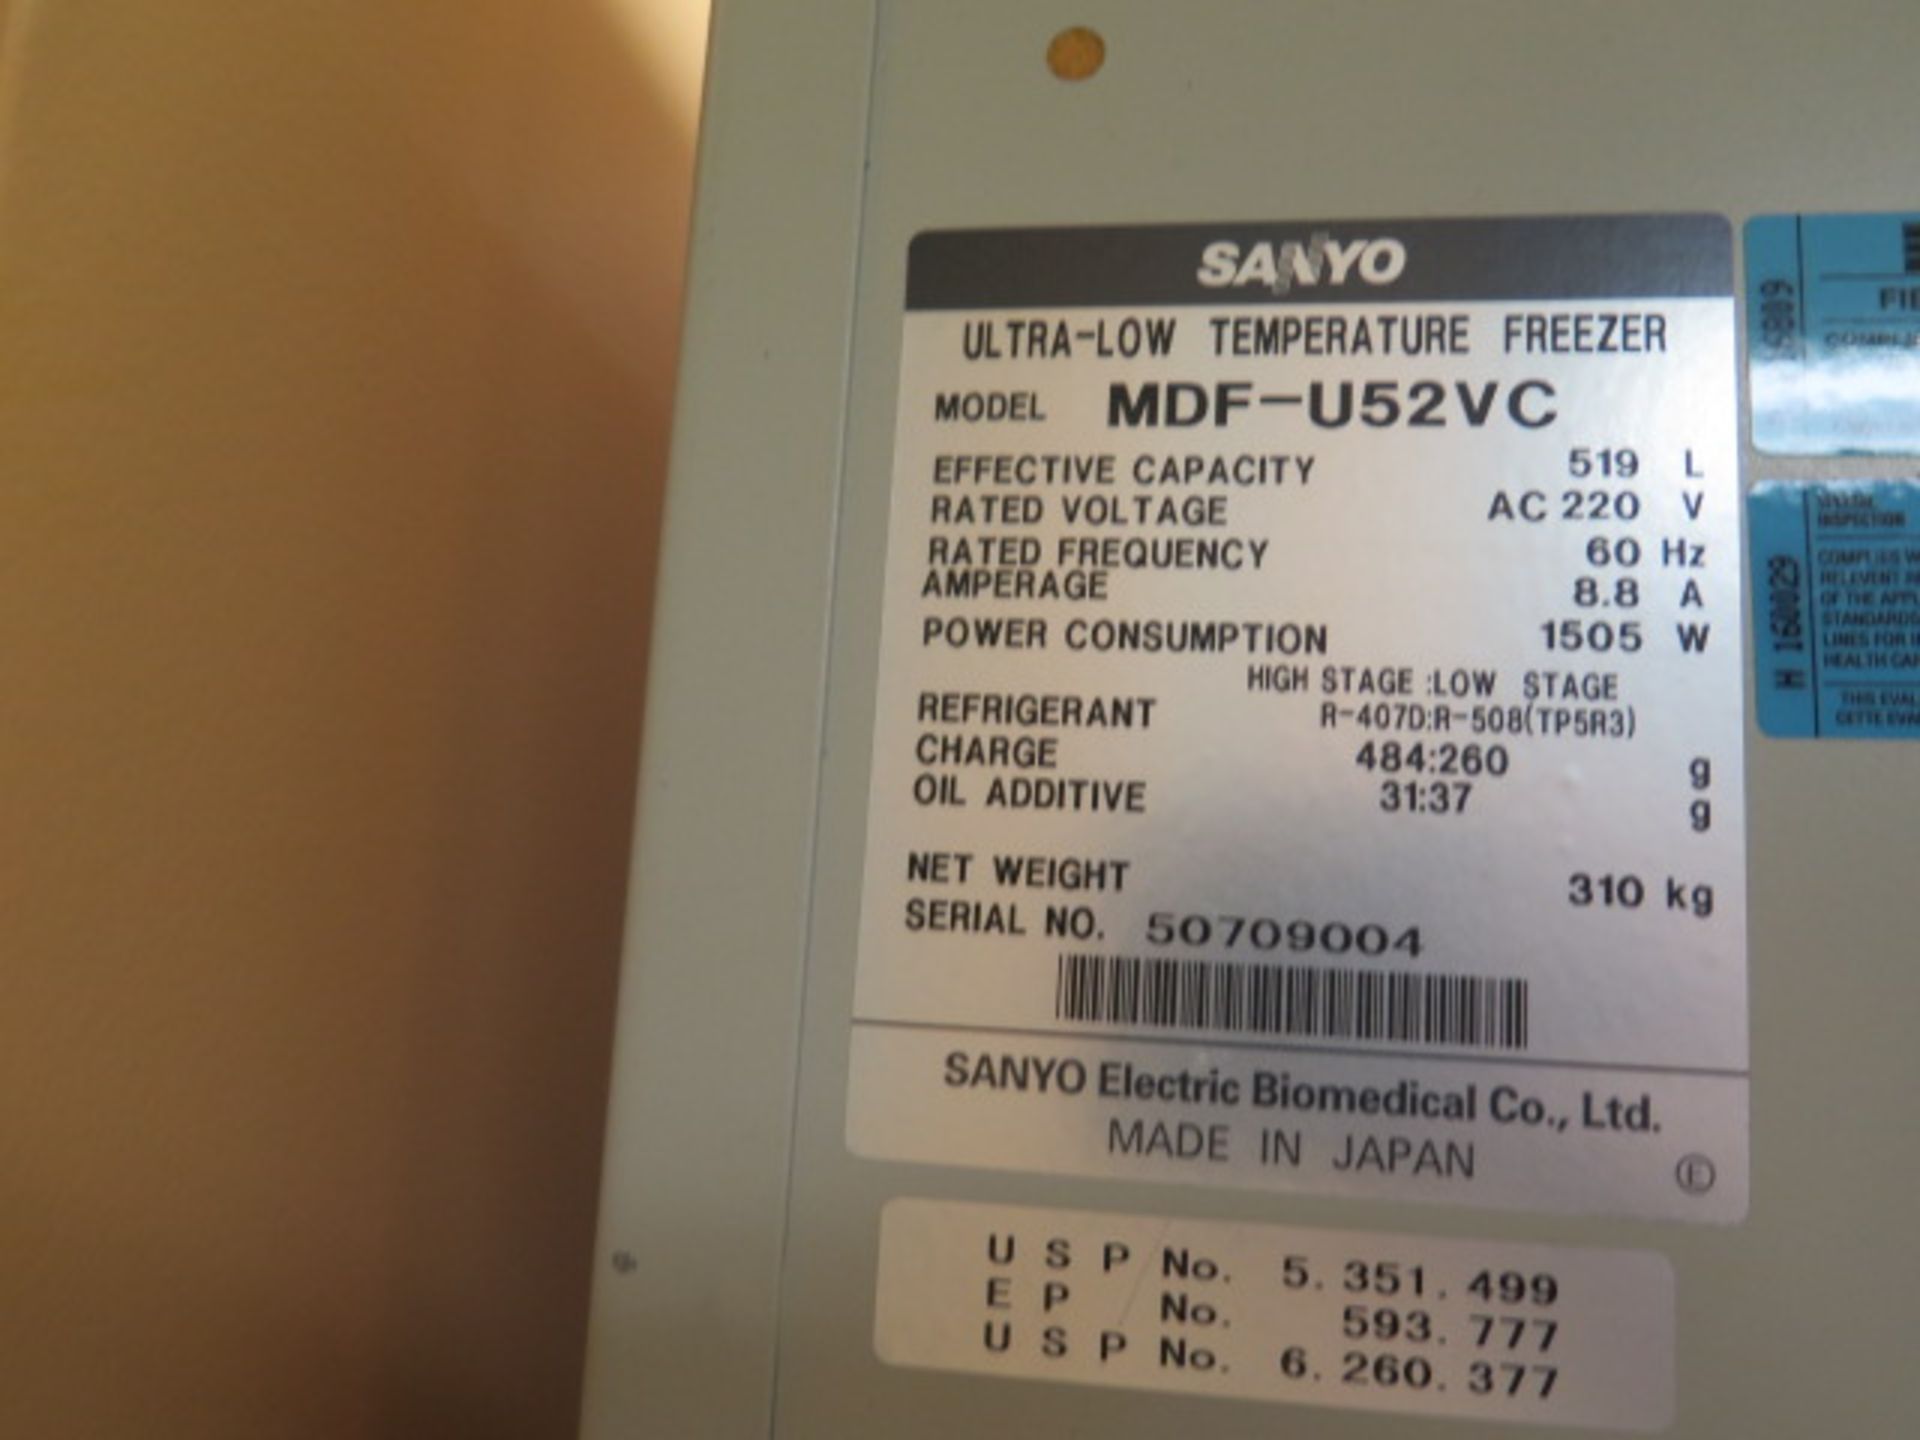 Sanyo “Ultra Low” VIP Series mdl. MDF-U52VC -86 Degree C Laboratory Freezer s/n 50709004 (SOLD AS-IS - Image 12 of 12